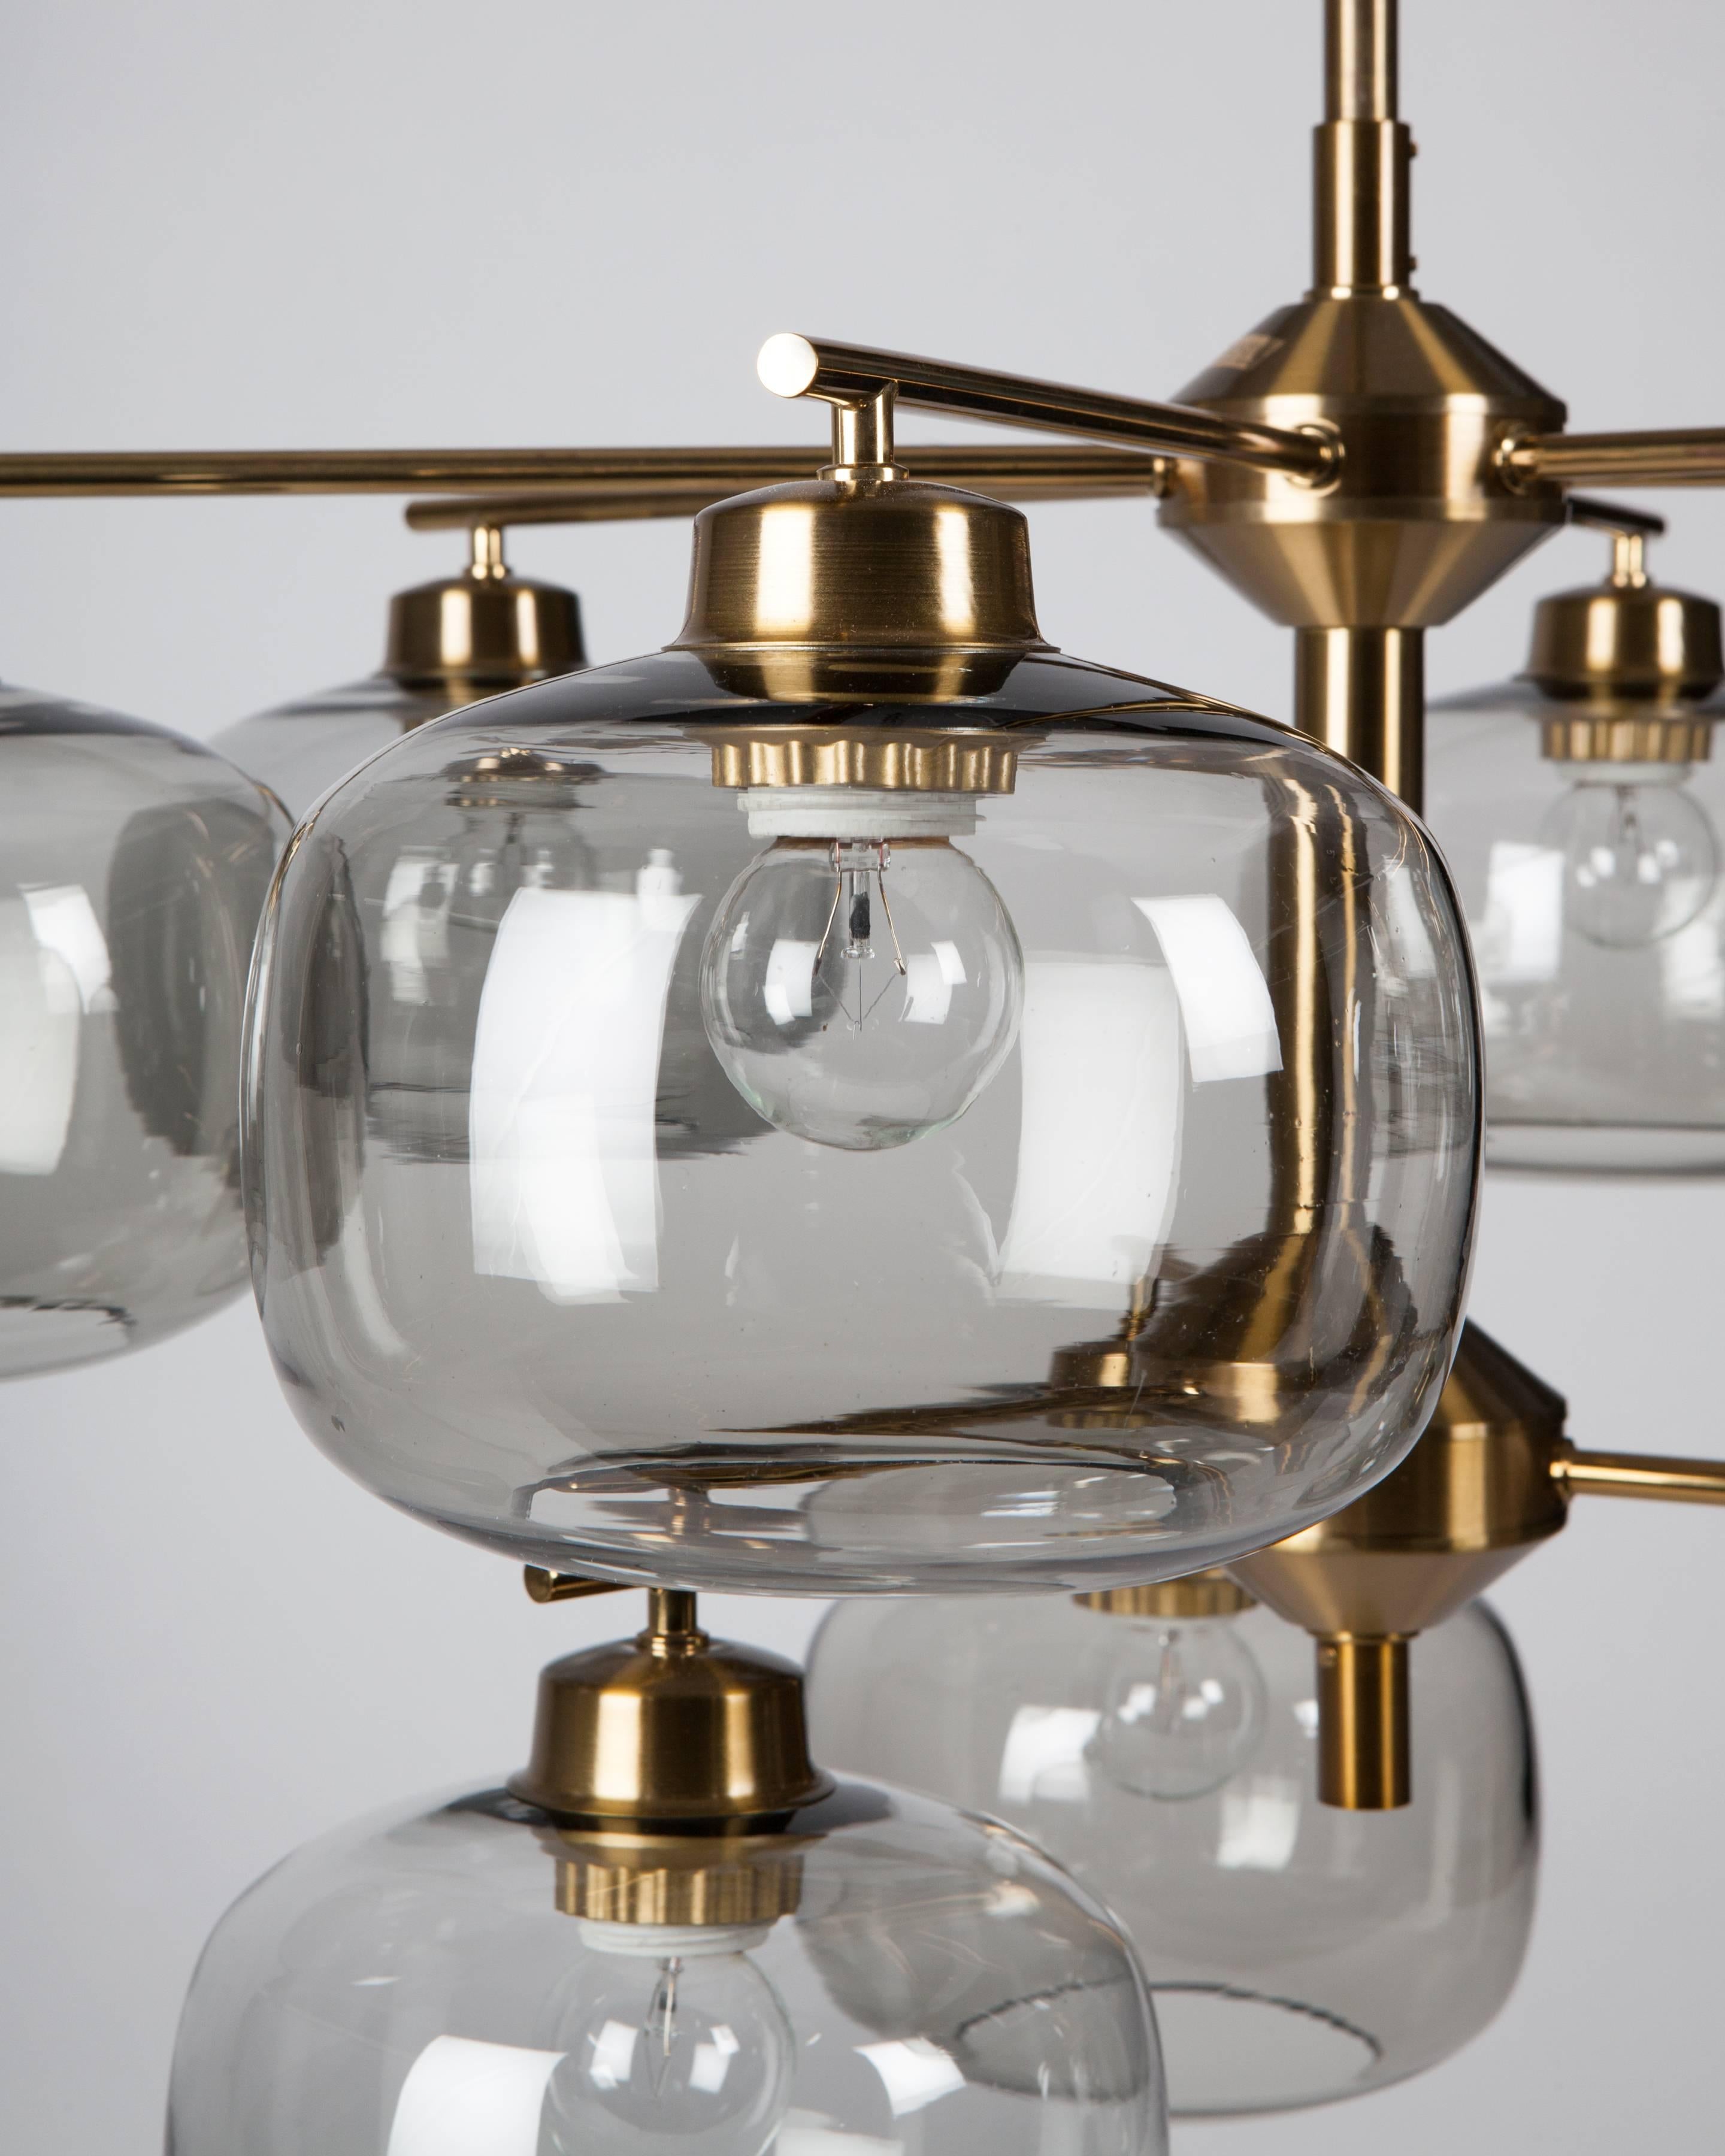 AHL4112
A vintage nine-light chandelier with smoked glass spherical shades in its original lacquered brass finish. Designed by Holger Johansson and signed by the Swedish maker Westal. Due to the antique nature of this fixture, there are some nicks